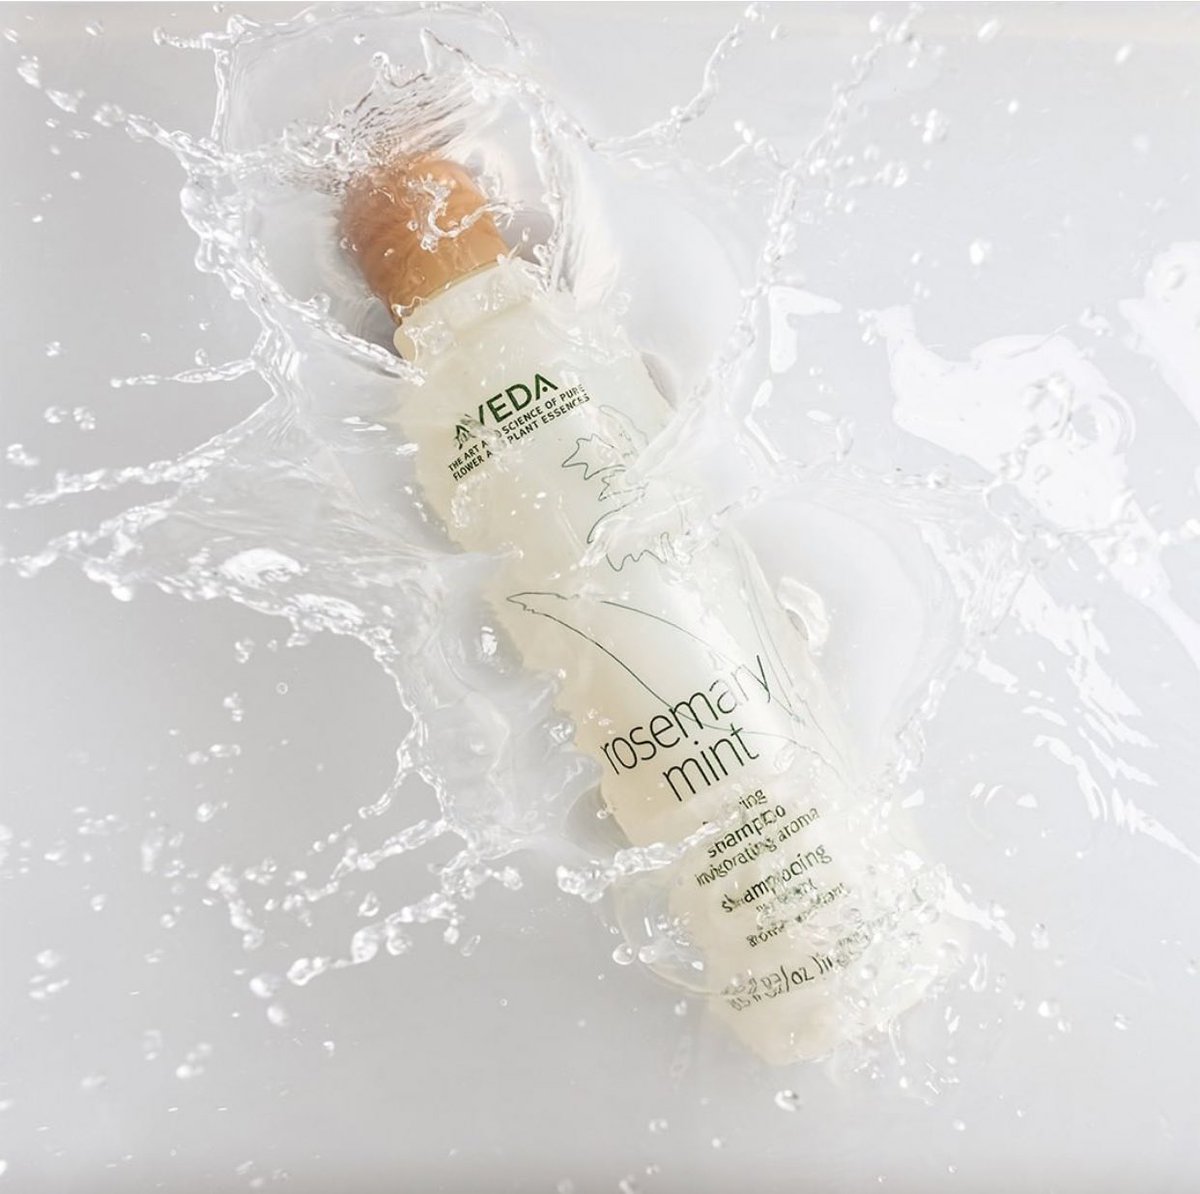 Rosemary mint purifying shampoo and conditioner. 
Micelles and white vinegar gently clarify hair (without stripping) and adds body and shine 💧🍃
.
.
.
#aveda #avedauk #avedaproducts #organic #vegan #hairproductsthatwork #productstyling #crueltyfree #hairproducts #rosemarymint